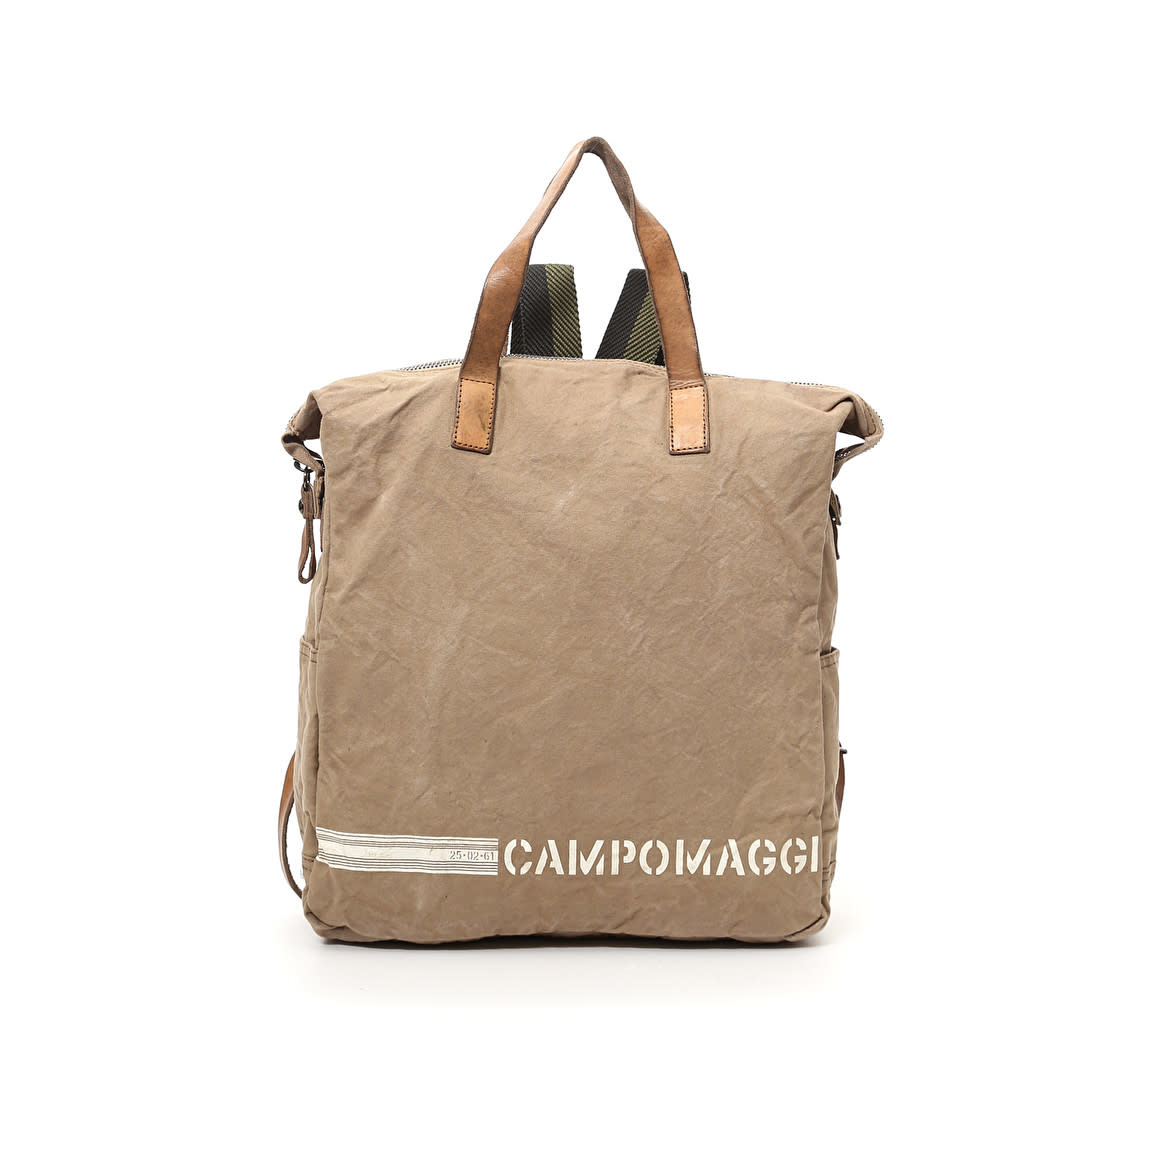 Campomaggi Backpack. Medium. Canvas + Leather + Ribbon. Beige + Cognac Stained + White Print.